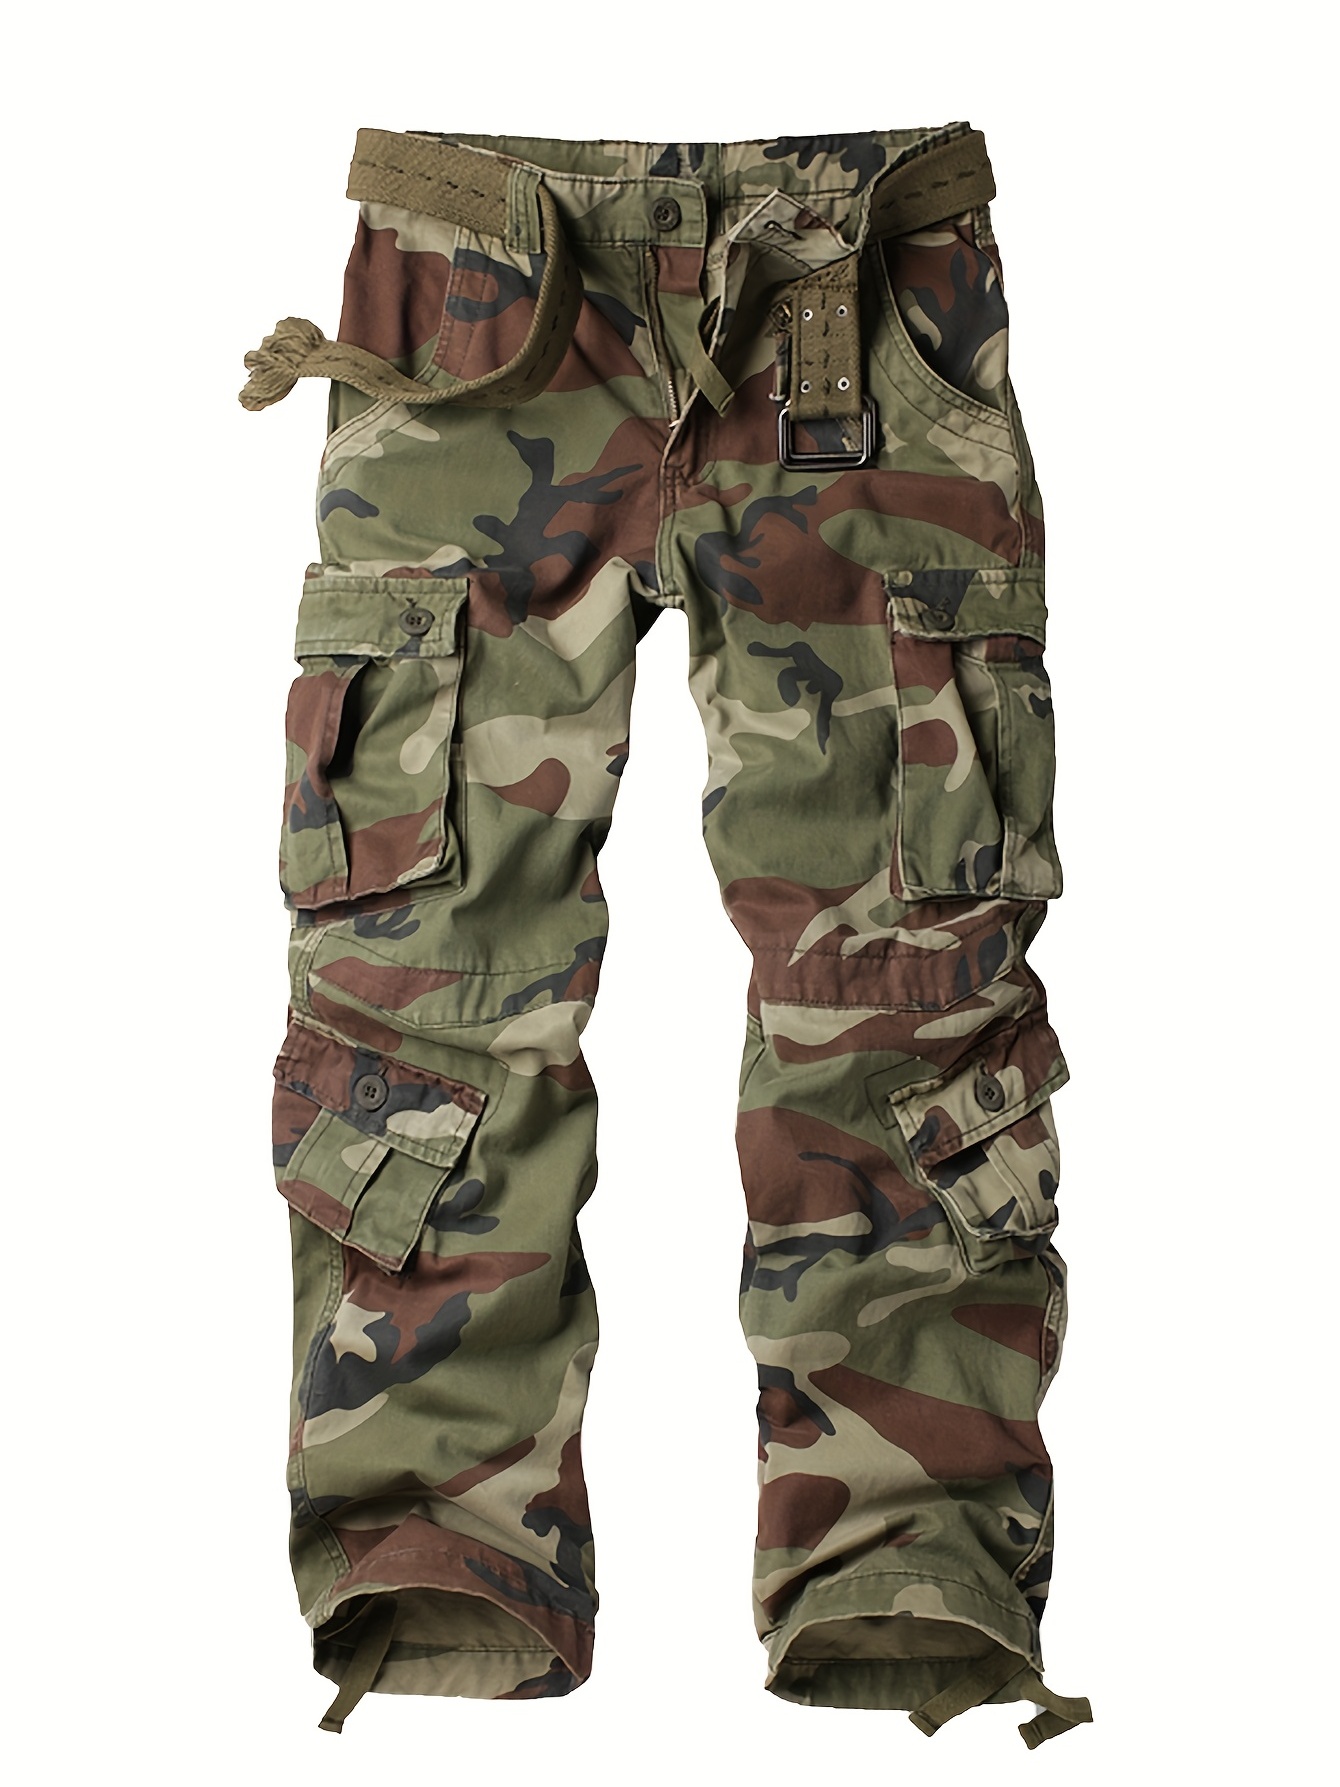 Men's Camouflage Tactical BDU Pants | Military Cargo Fatigues, Camo Fashion  Trousers for Outdoor, Hunting, and Urban Wear